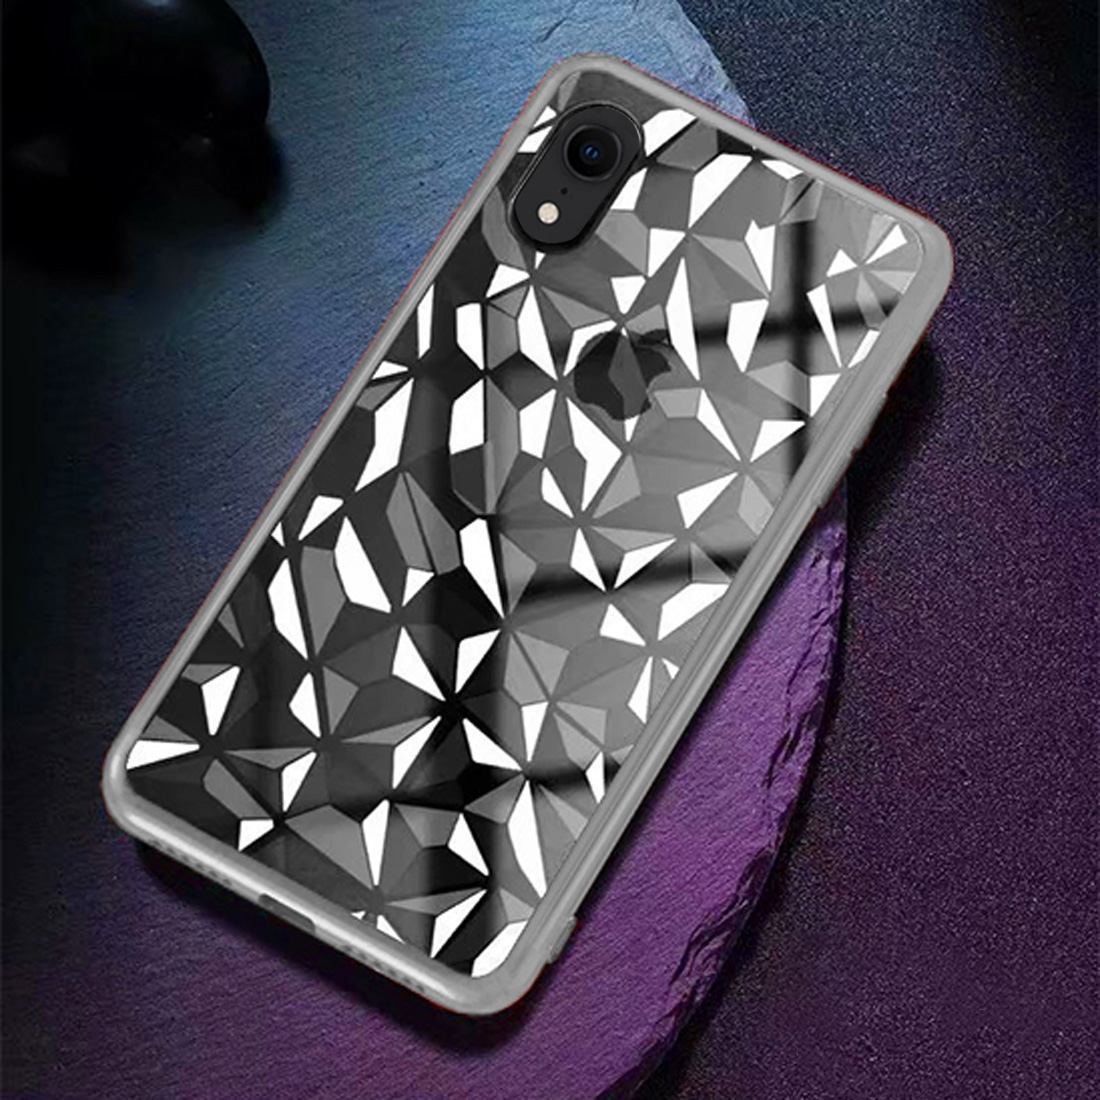 Diamond Texture Electroplating TPU Case For iPhone XR 6.1 inch,Silver